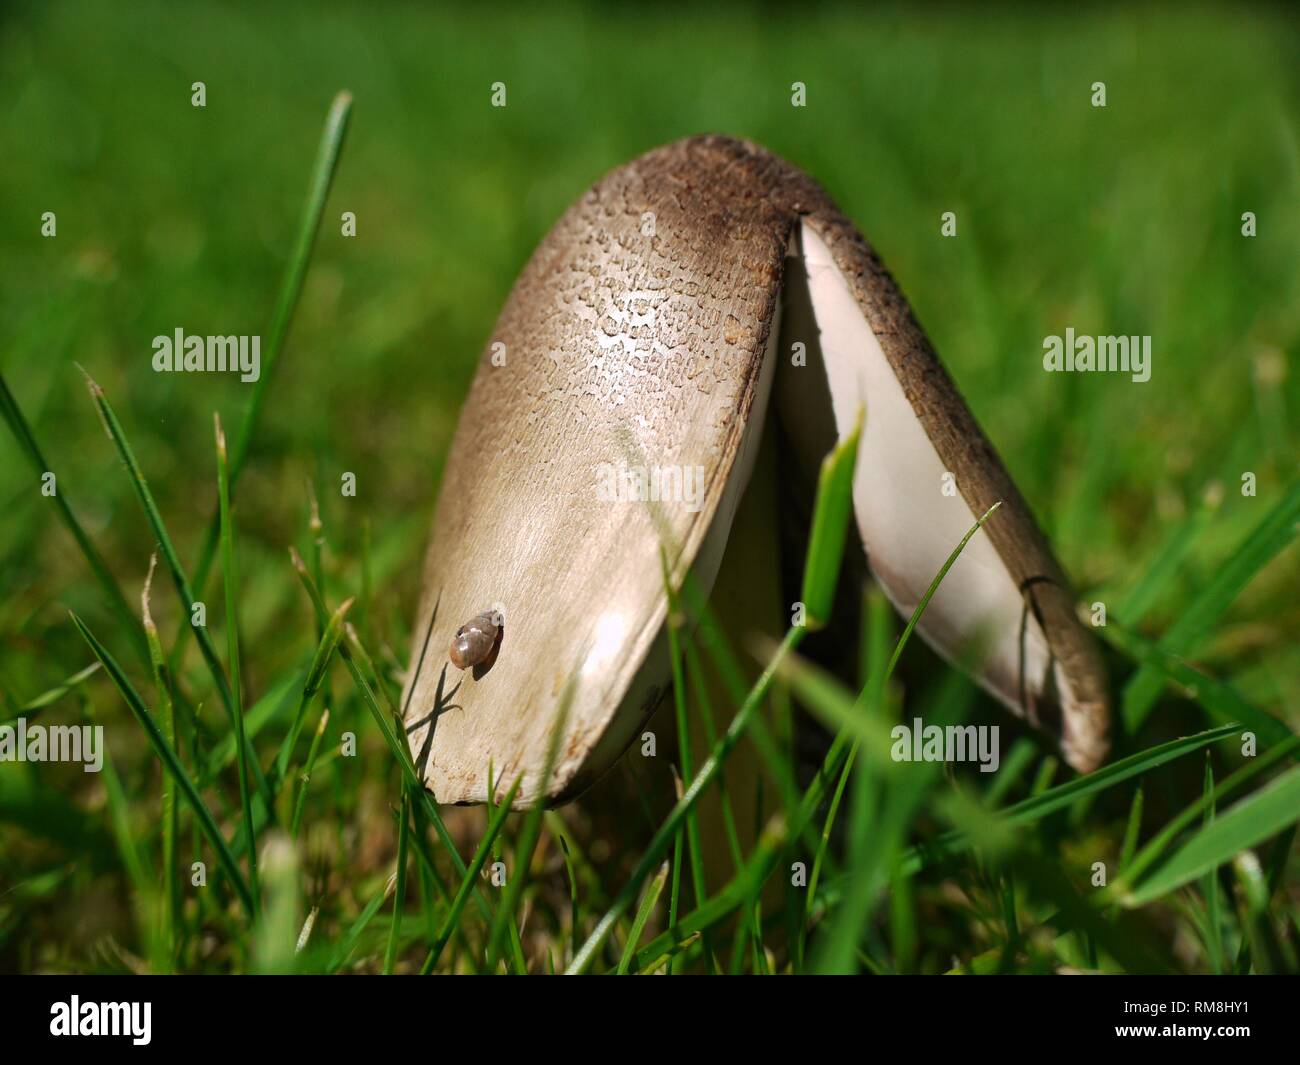 A macro image of the Common Inkcap, Coprinus atramentarius, which is poisonous when mixed with alcohol, inducing a rapid and severe hangover. Stock Photo